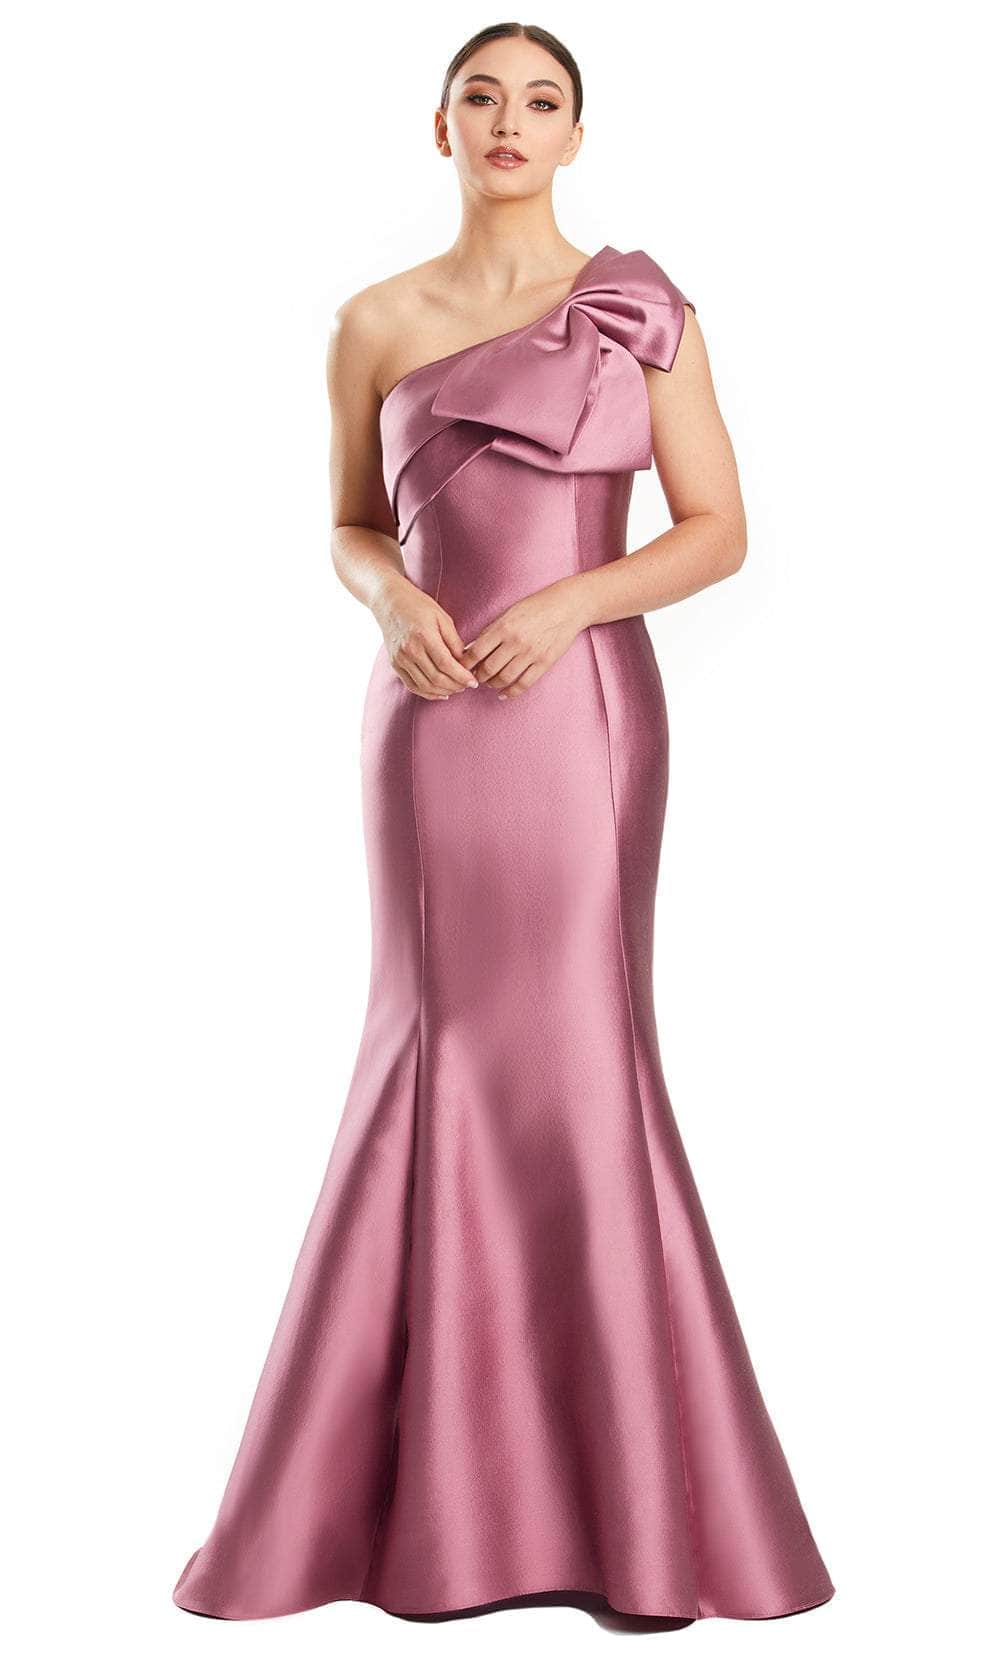 Alexander by Daymor 1850F23 - Bow Accent Asymmetric Evening Gown 00 / Rose